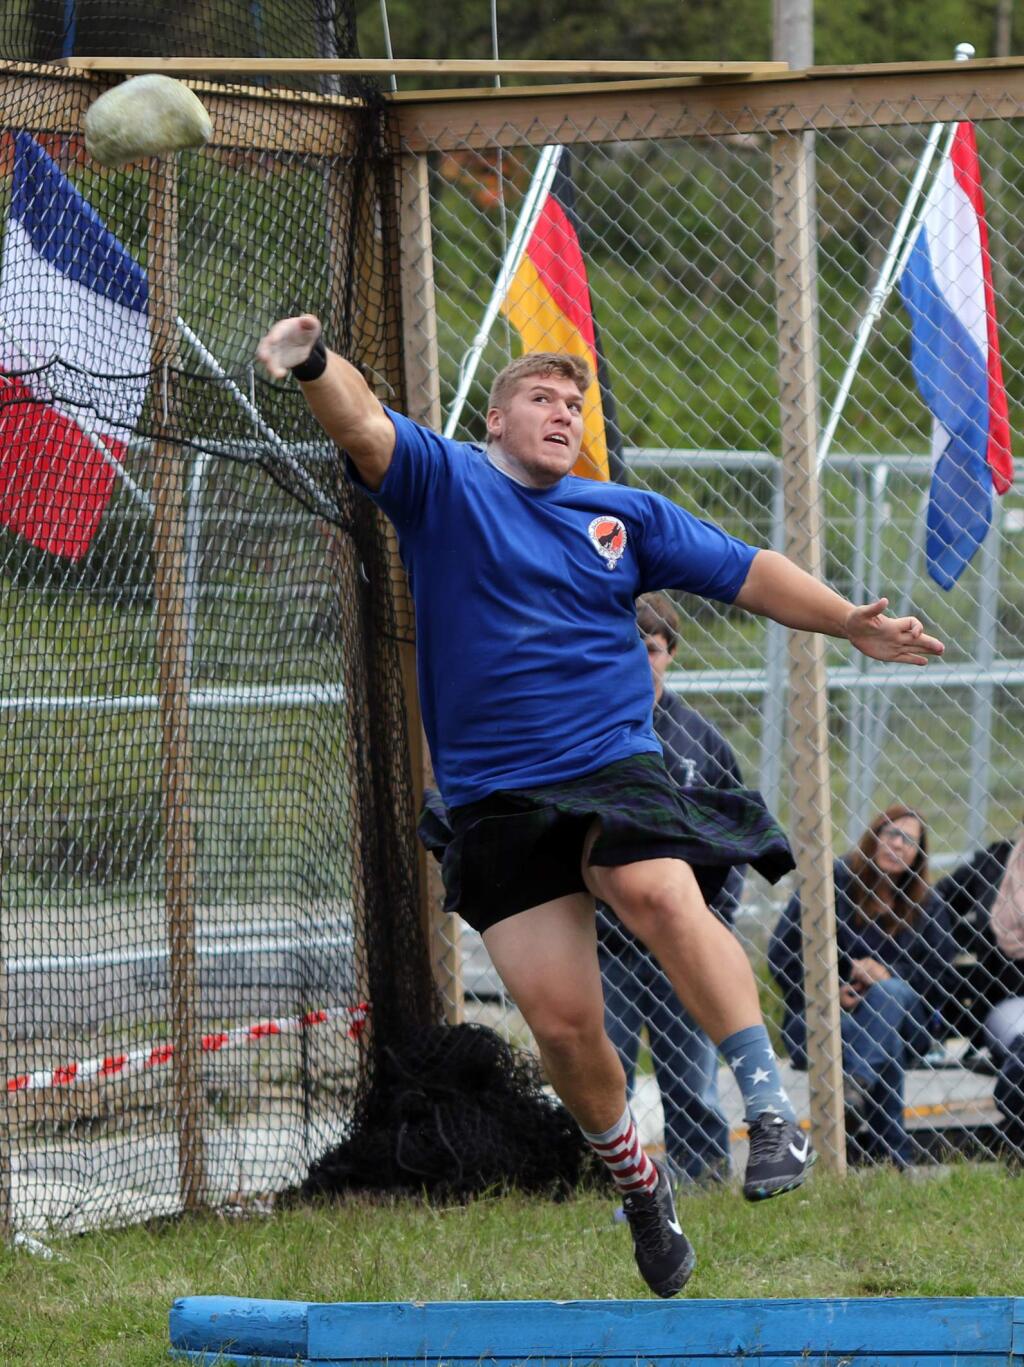 Gary Randolph launches a throw in the stone put competition at the Amateur Highland Games World Championships in Vinstra, Norway, in July. (Photo by Robert Katzenbeisser)